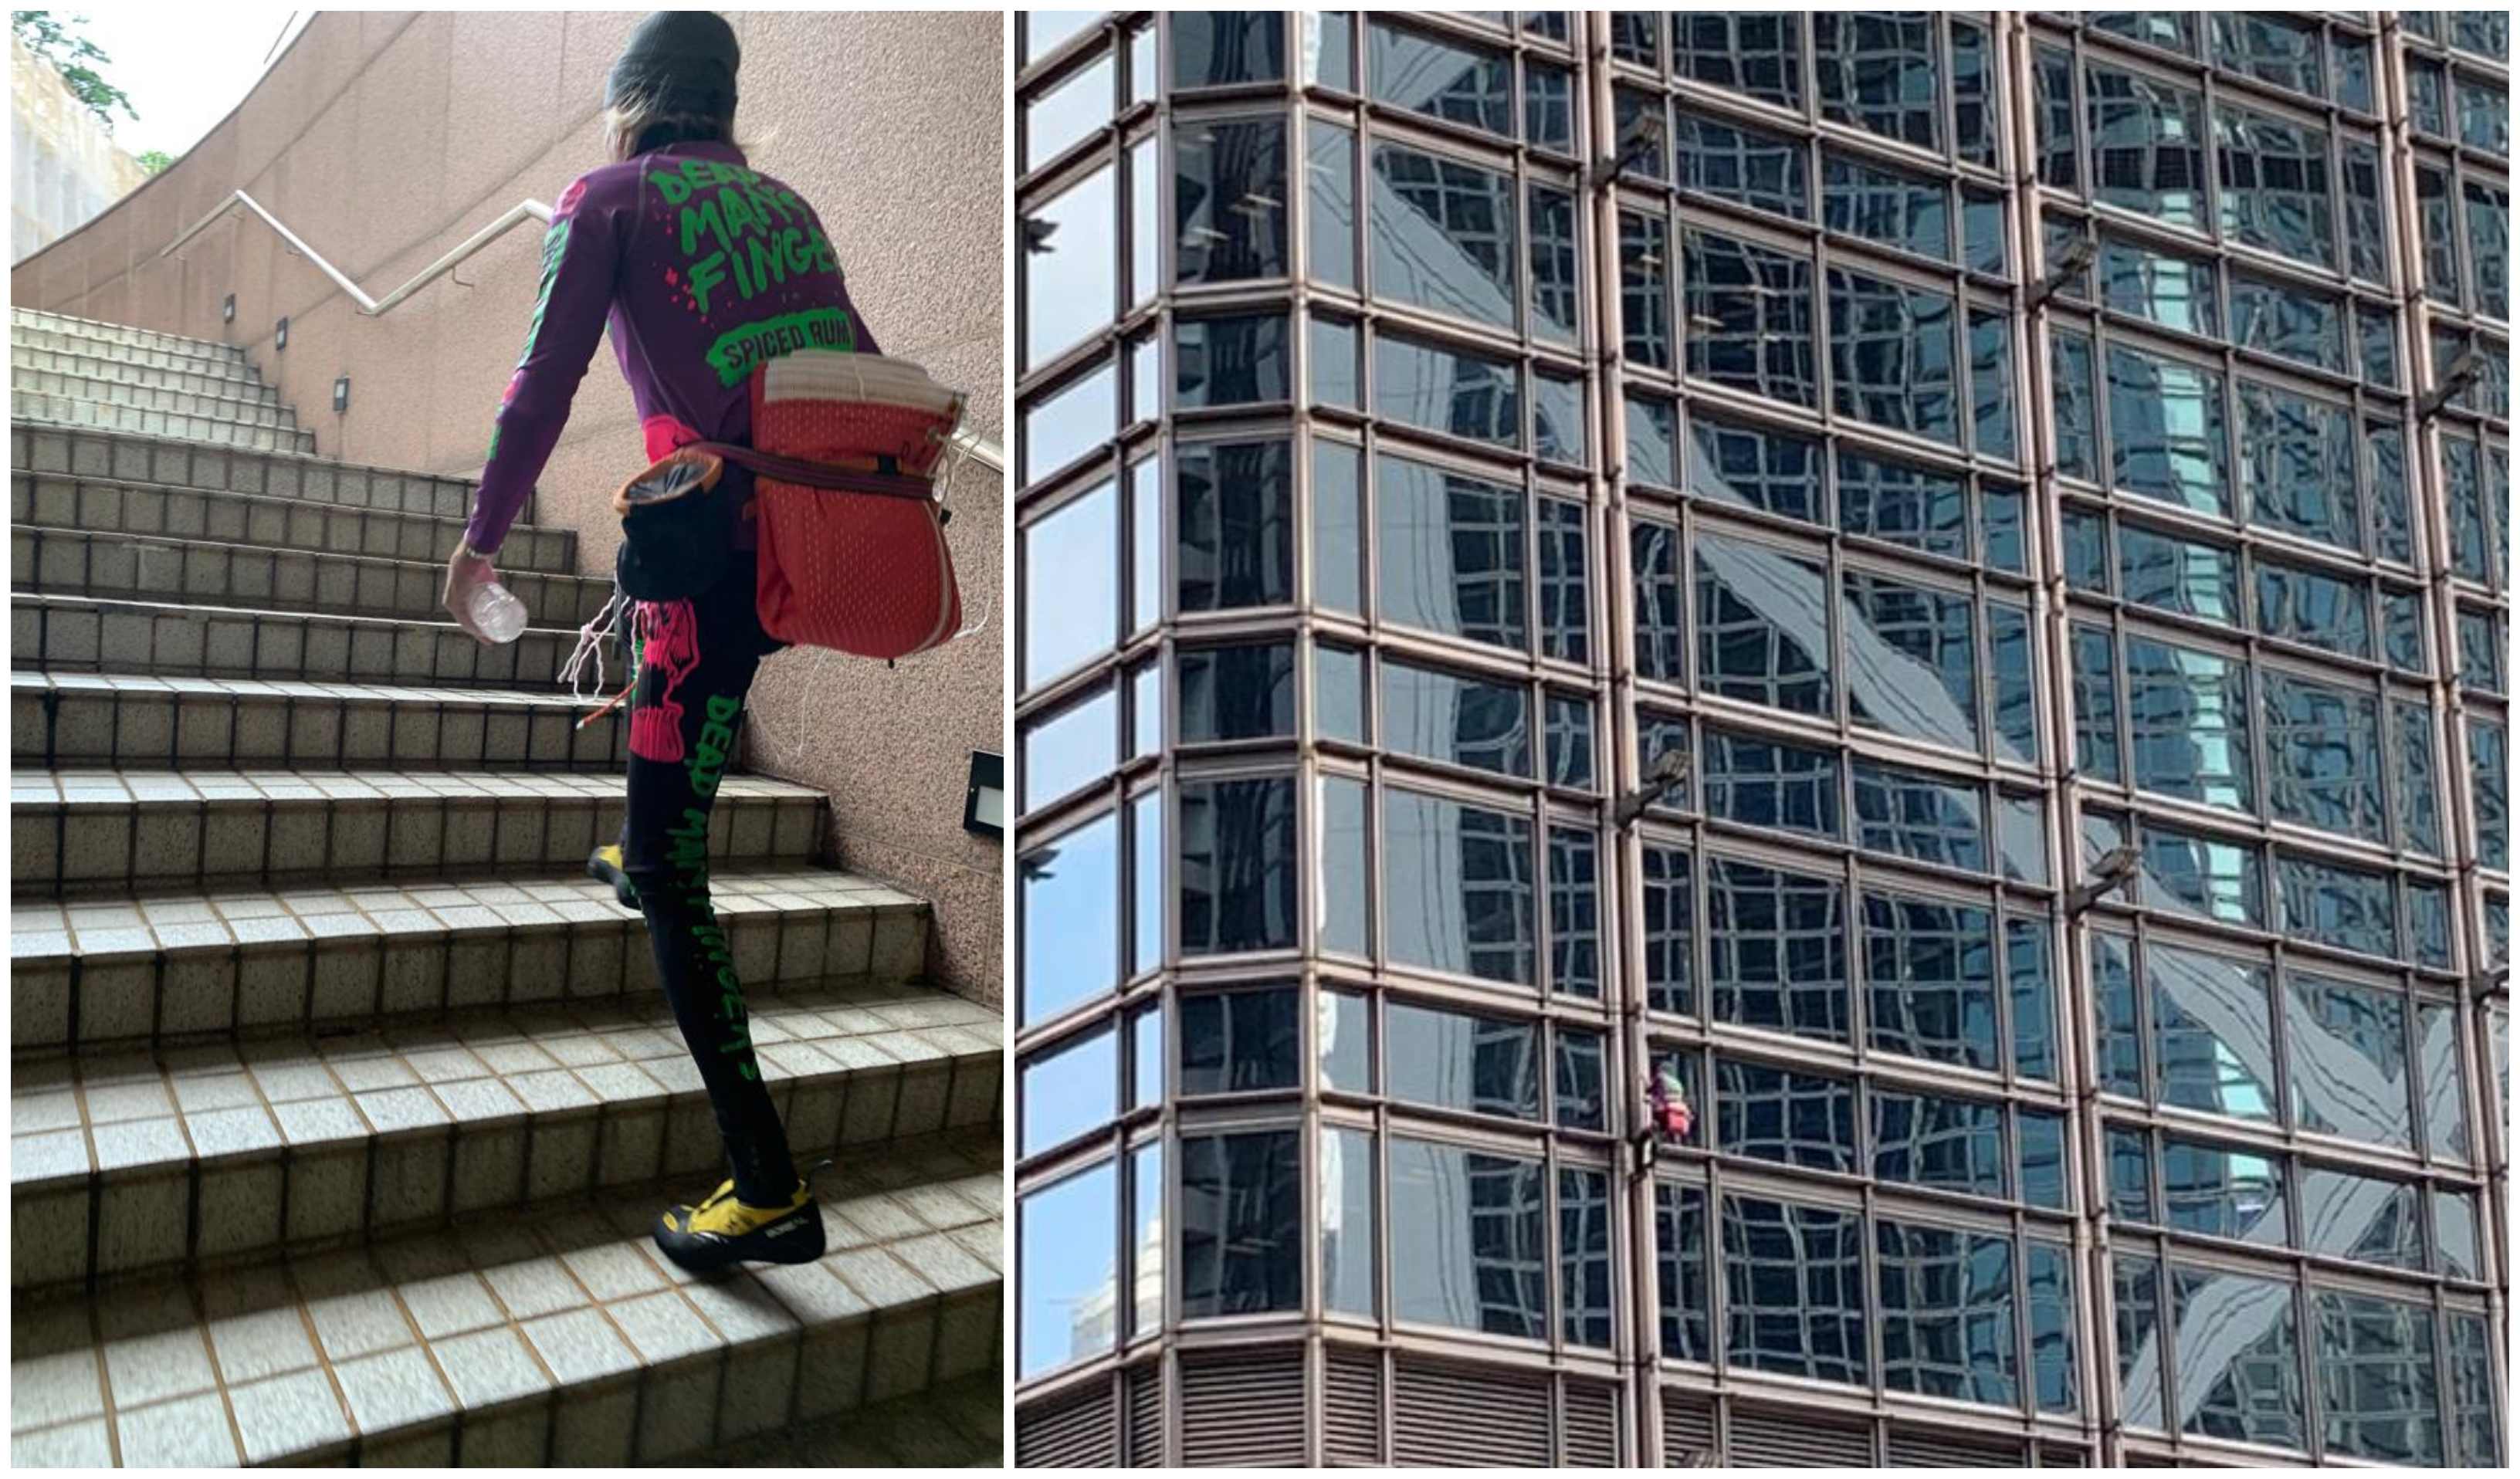 Alain Robert, decked out in gear bearing the name of a rum brand (left), scaled the Cheung Kong Center this morning (right). Photos Supplied.